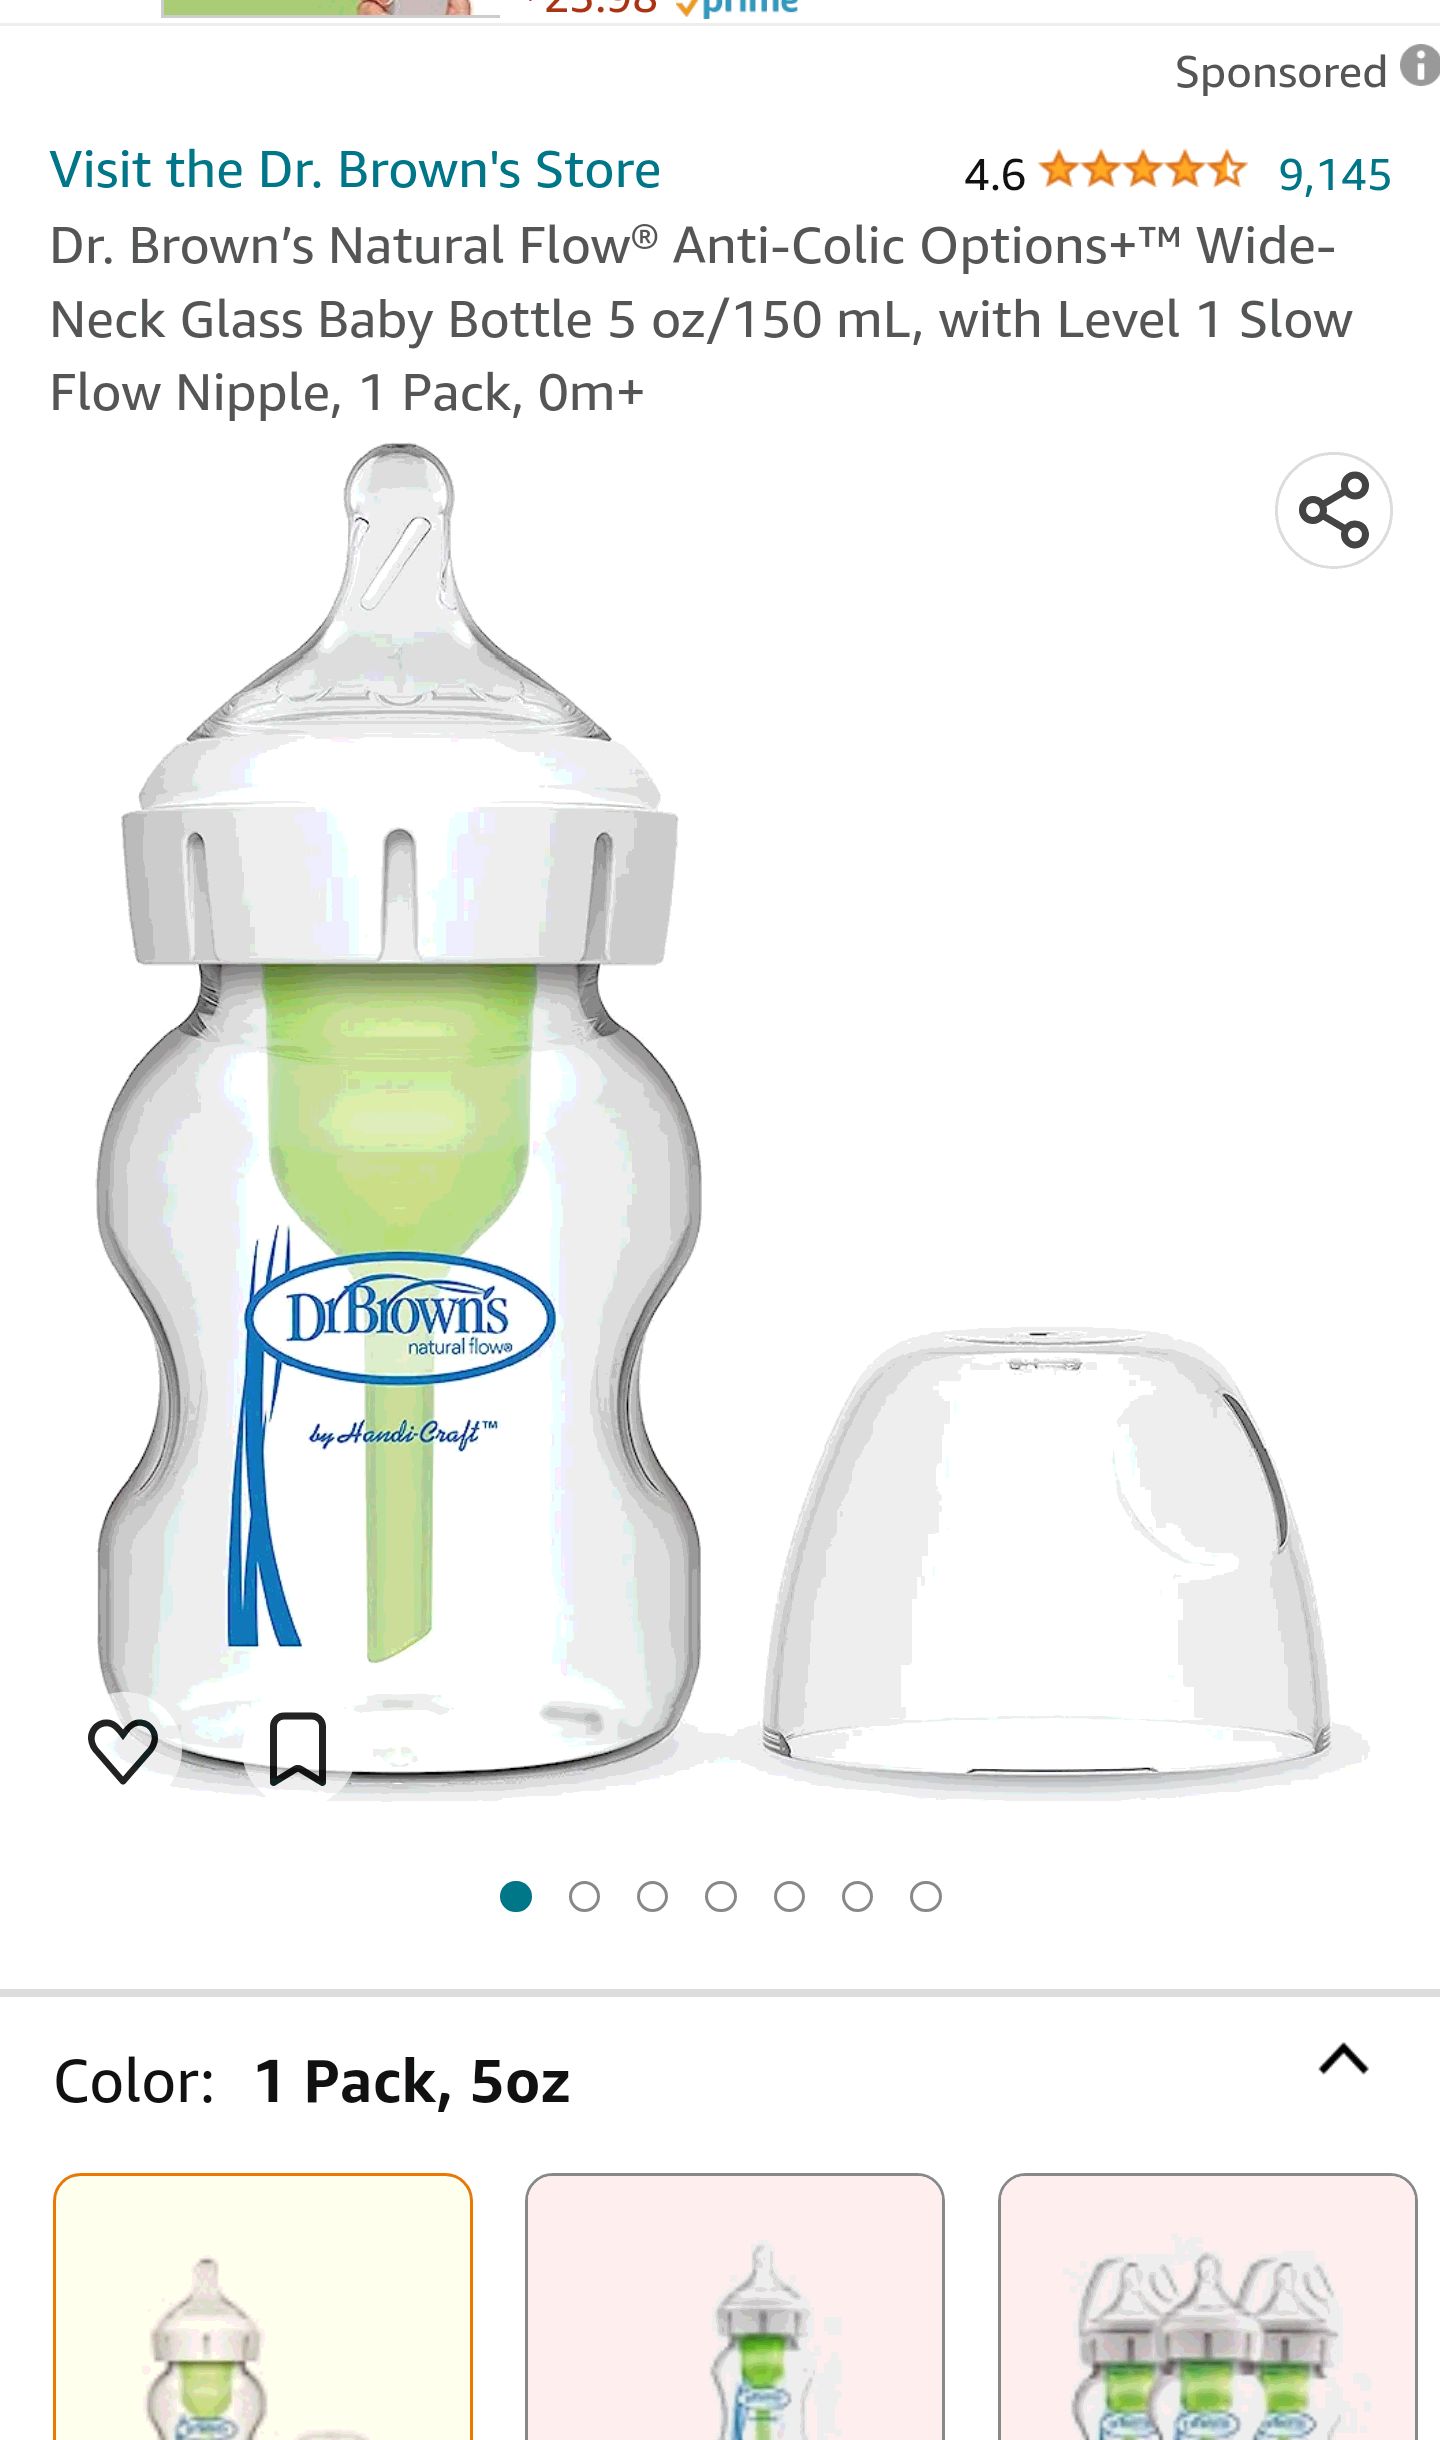 Amazon.com : Dr. Brown’s Natural Flow® Anti-Colic Options+™ Wide-Neck Glass Baby Bottle 5 oz/150 mL, with Level 1 Slow Flow Nipple, 1 Pack, 0m+ : Baby